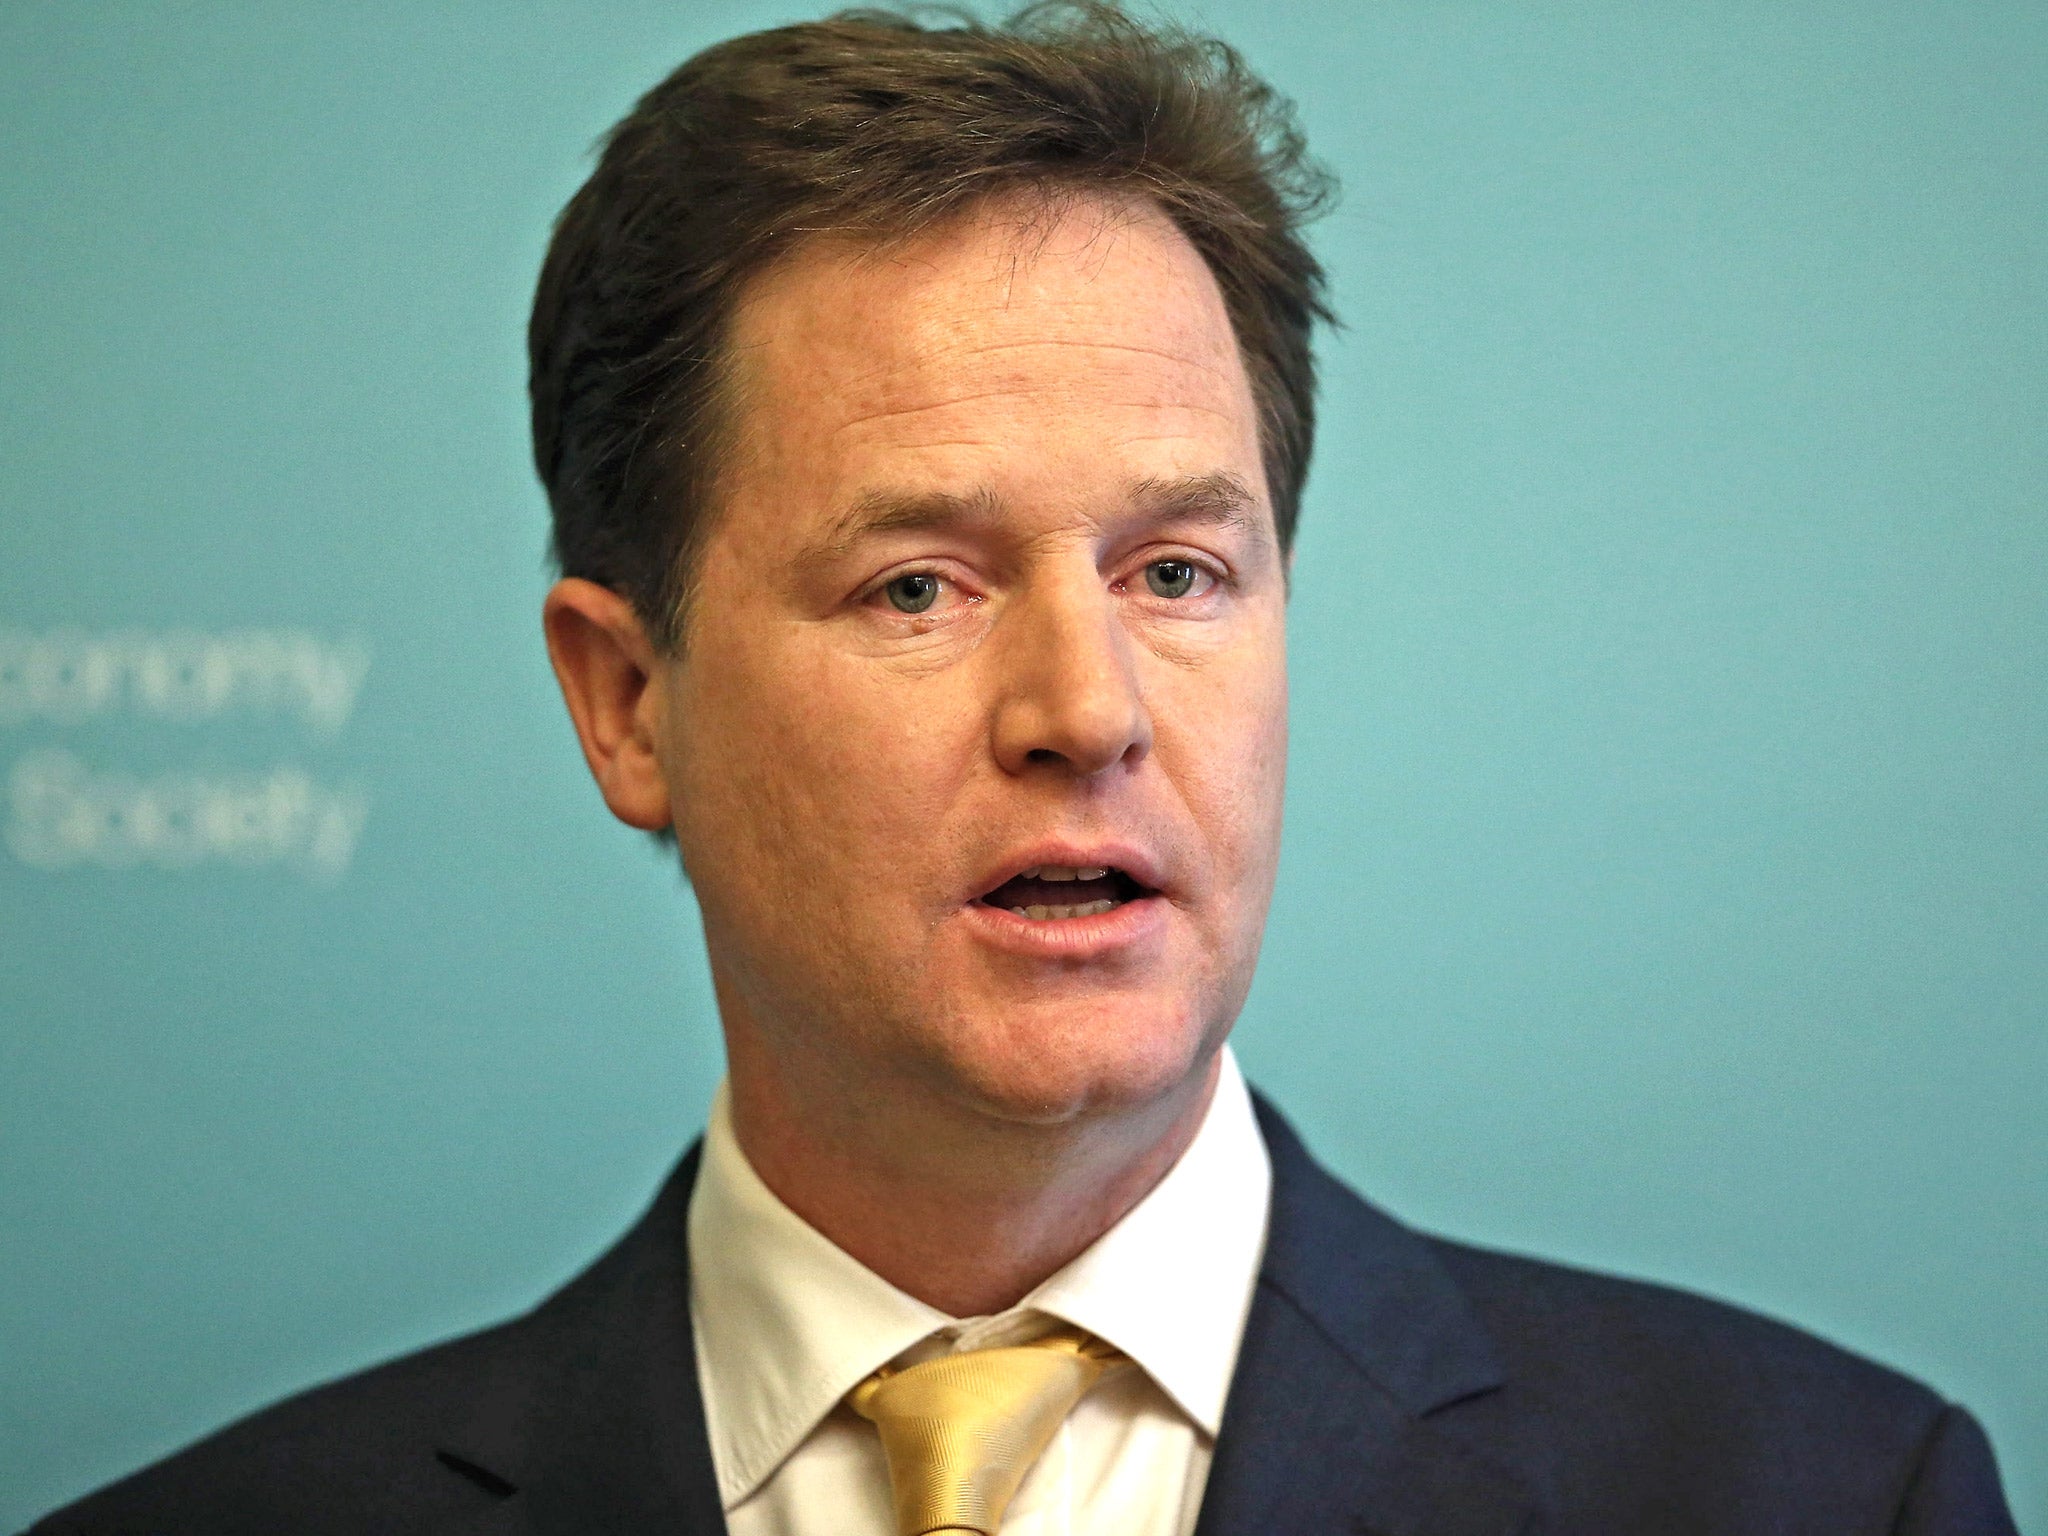 Clegg says he is prepared to consider new legislation to remove 'crooks' from the Lords